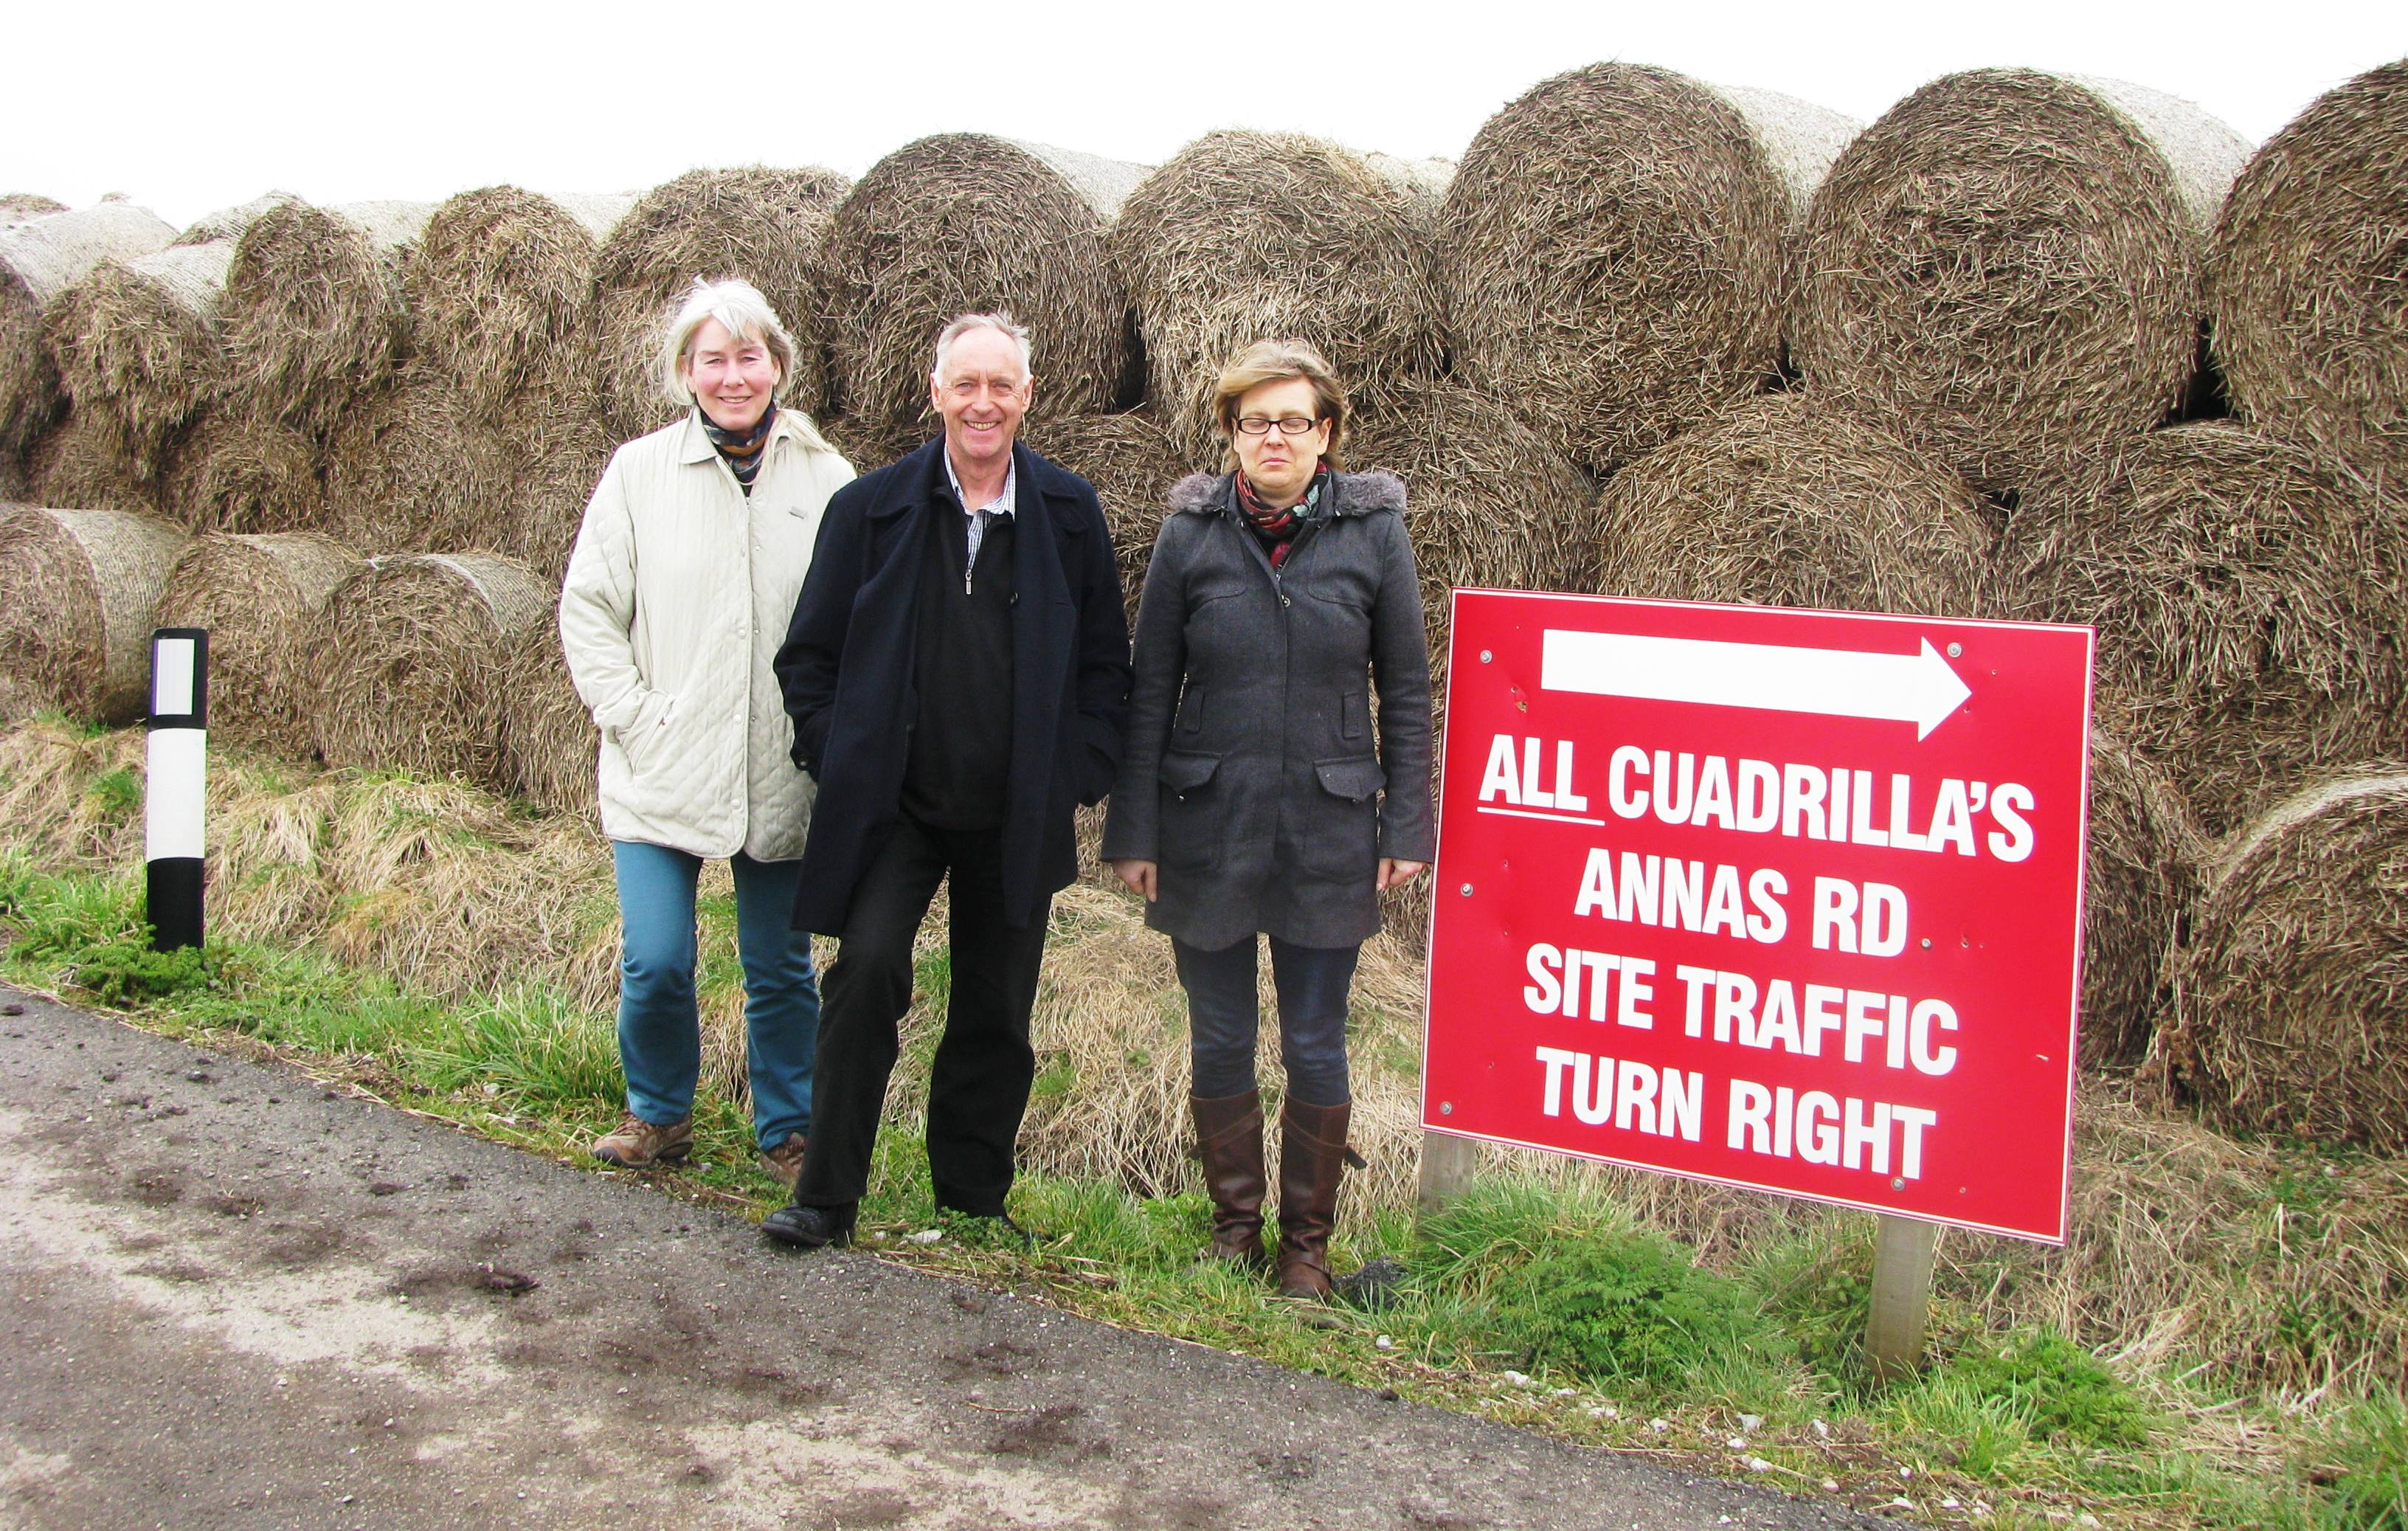 2013 03 07 Lucy Cooke Ian Roberts Jessica Ernst Straw Bales across Annas Rd at Cuadrilla frac site on Anna's Road Lancashire UK